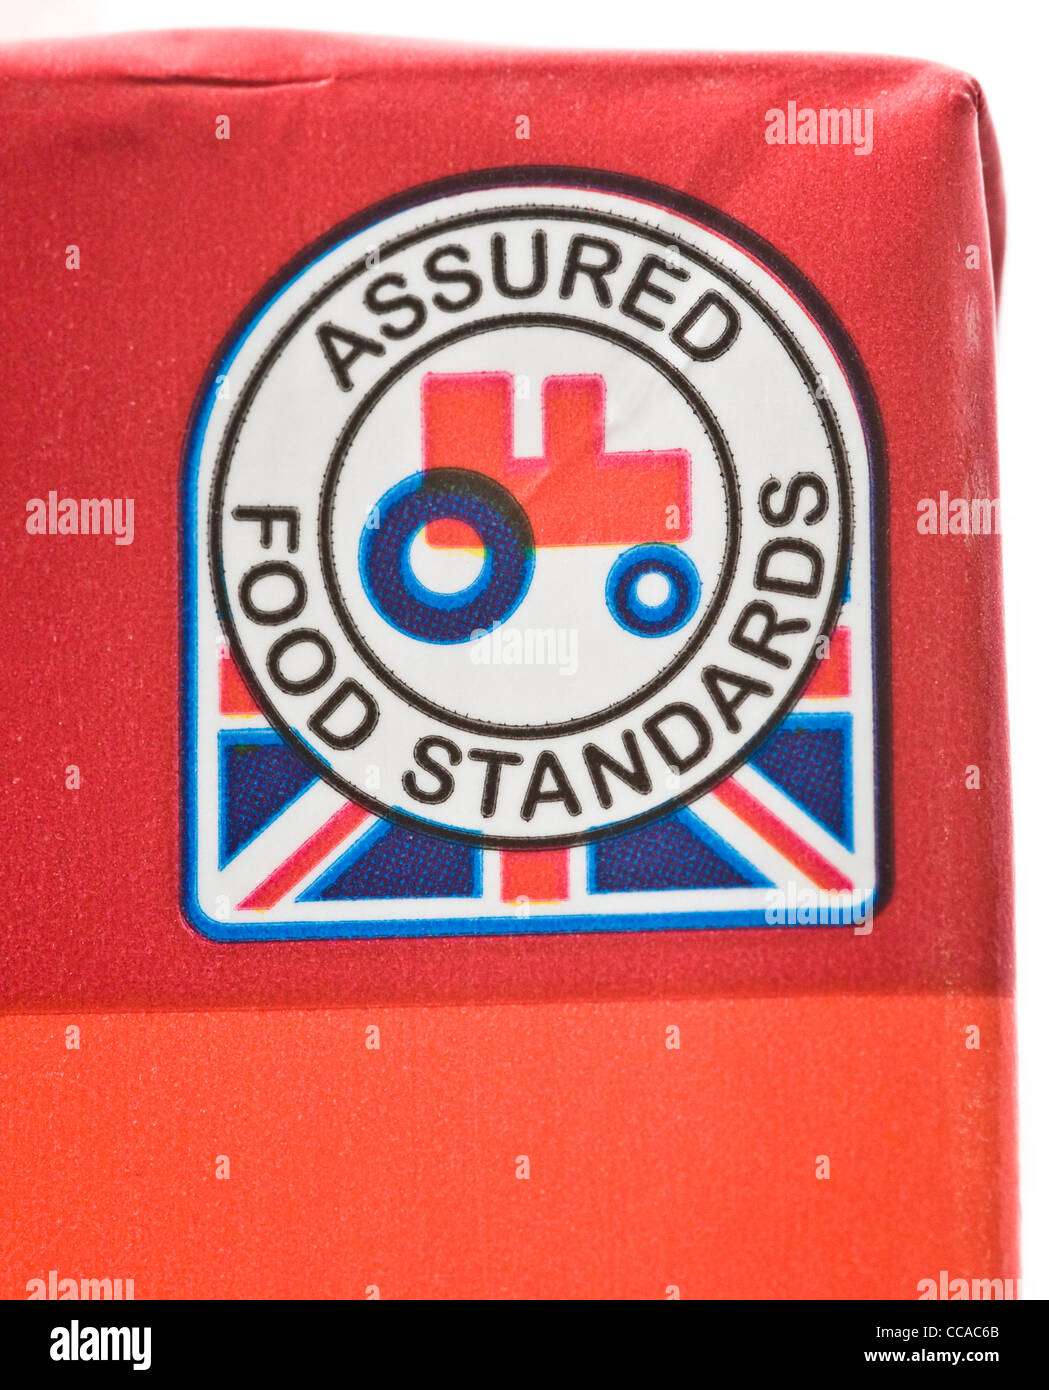 Red Tractor Assurance logo on a carton of milk Stock Photo - Alamy